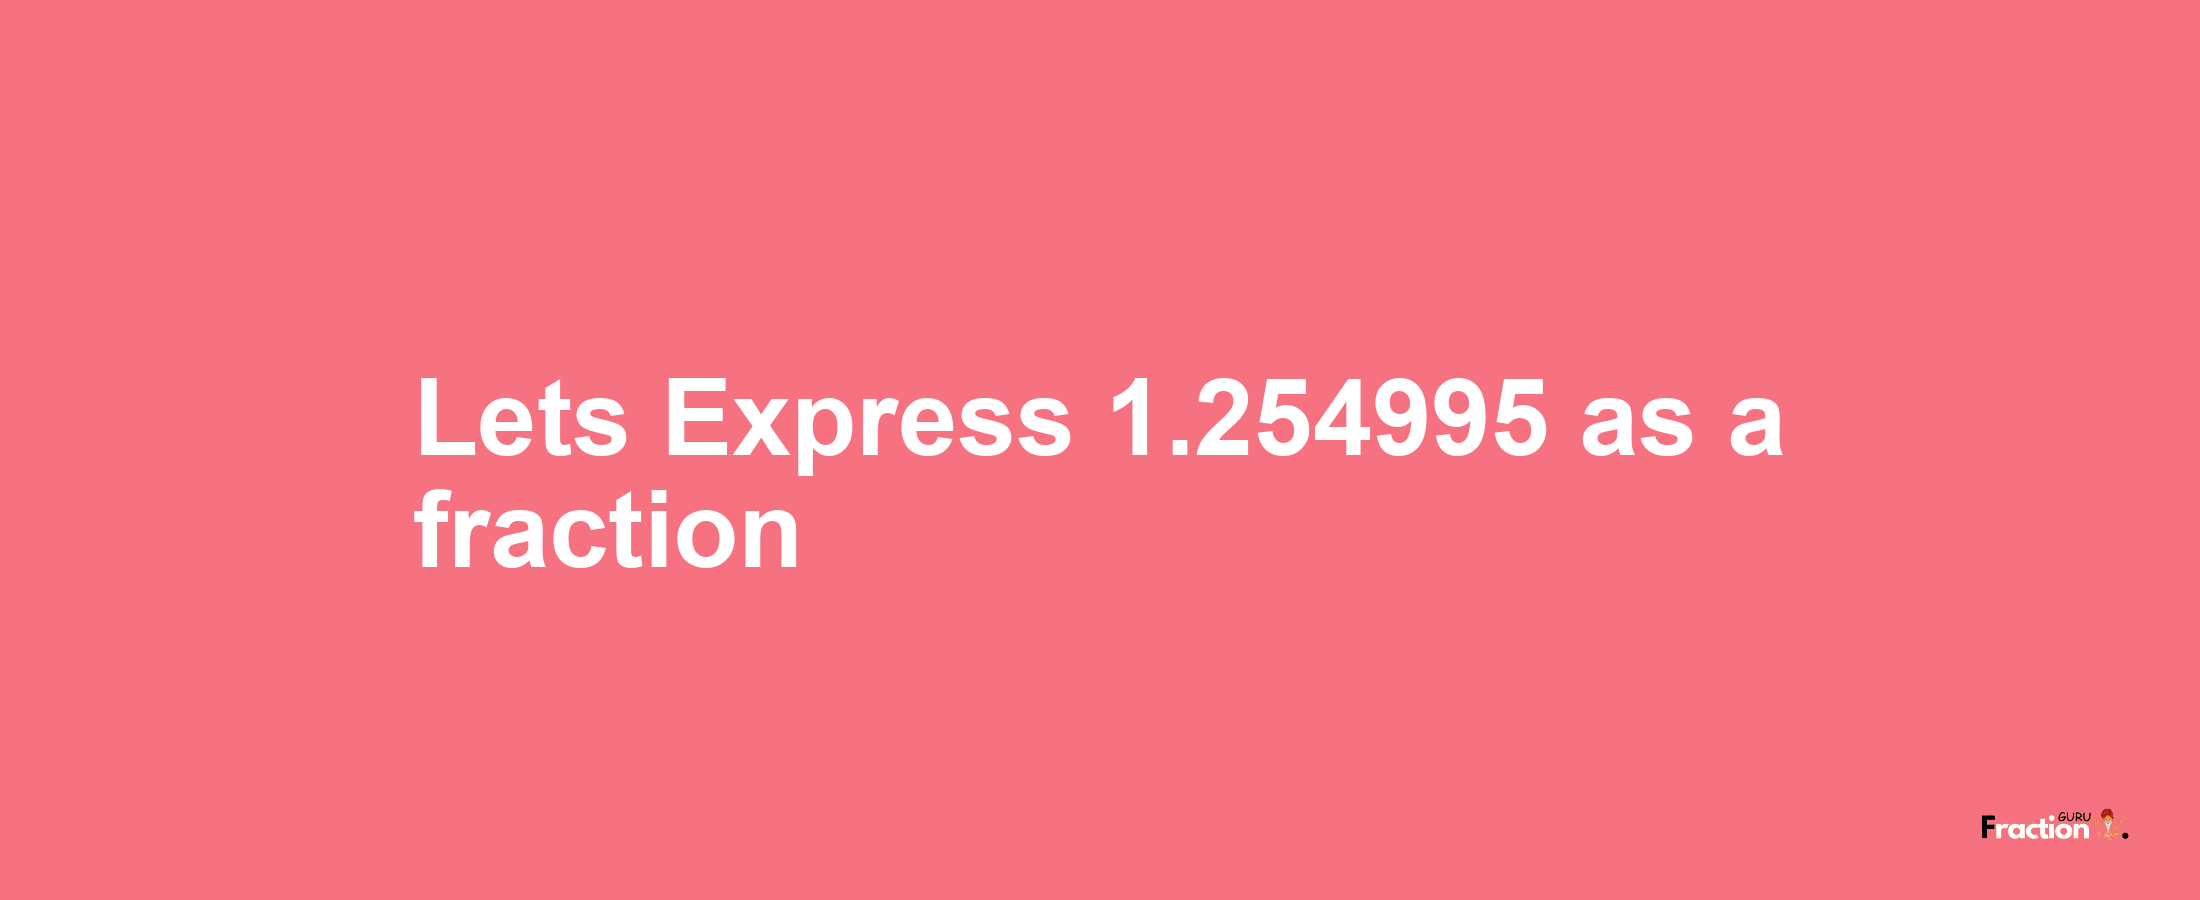 Lets Express 1.254995 as afraction